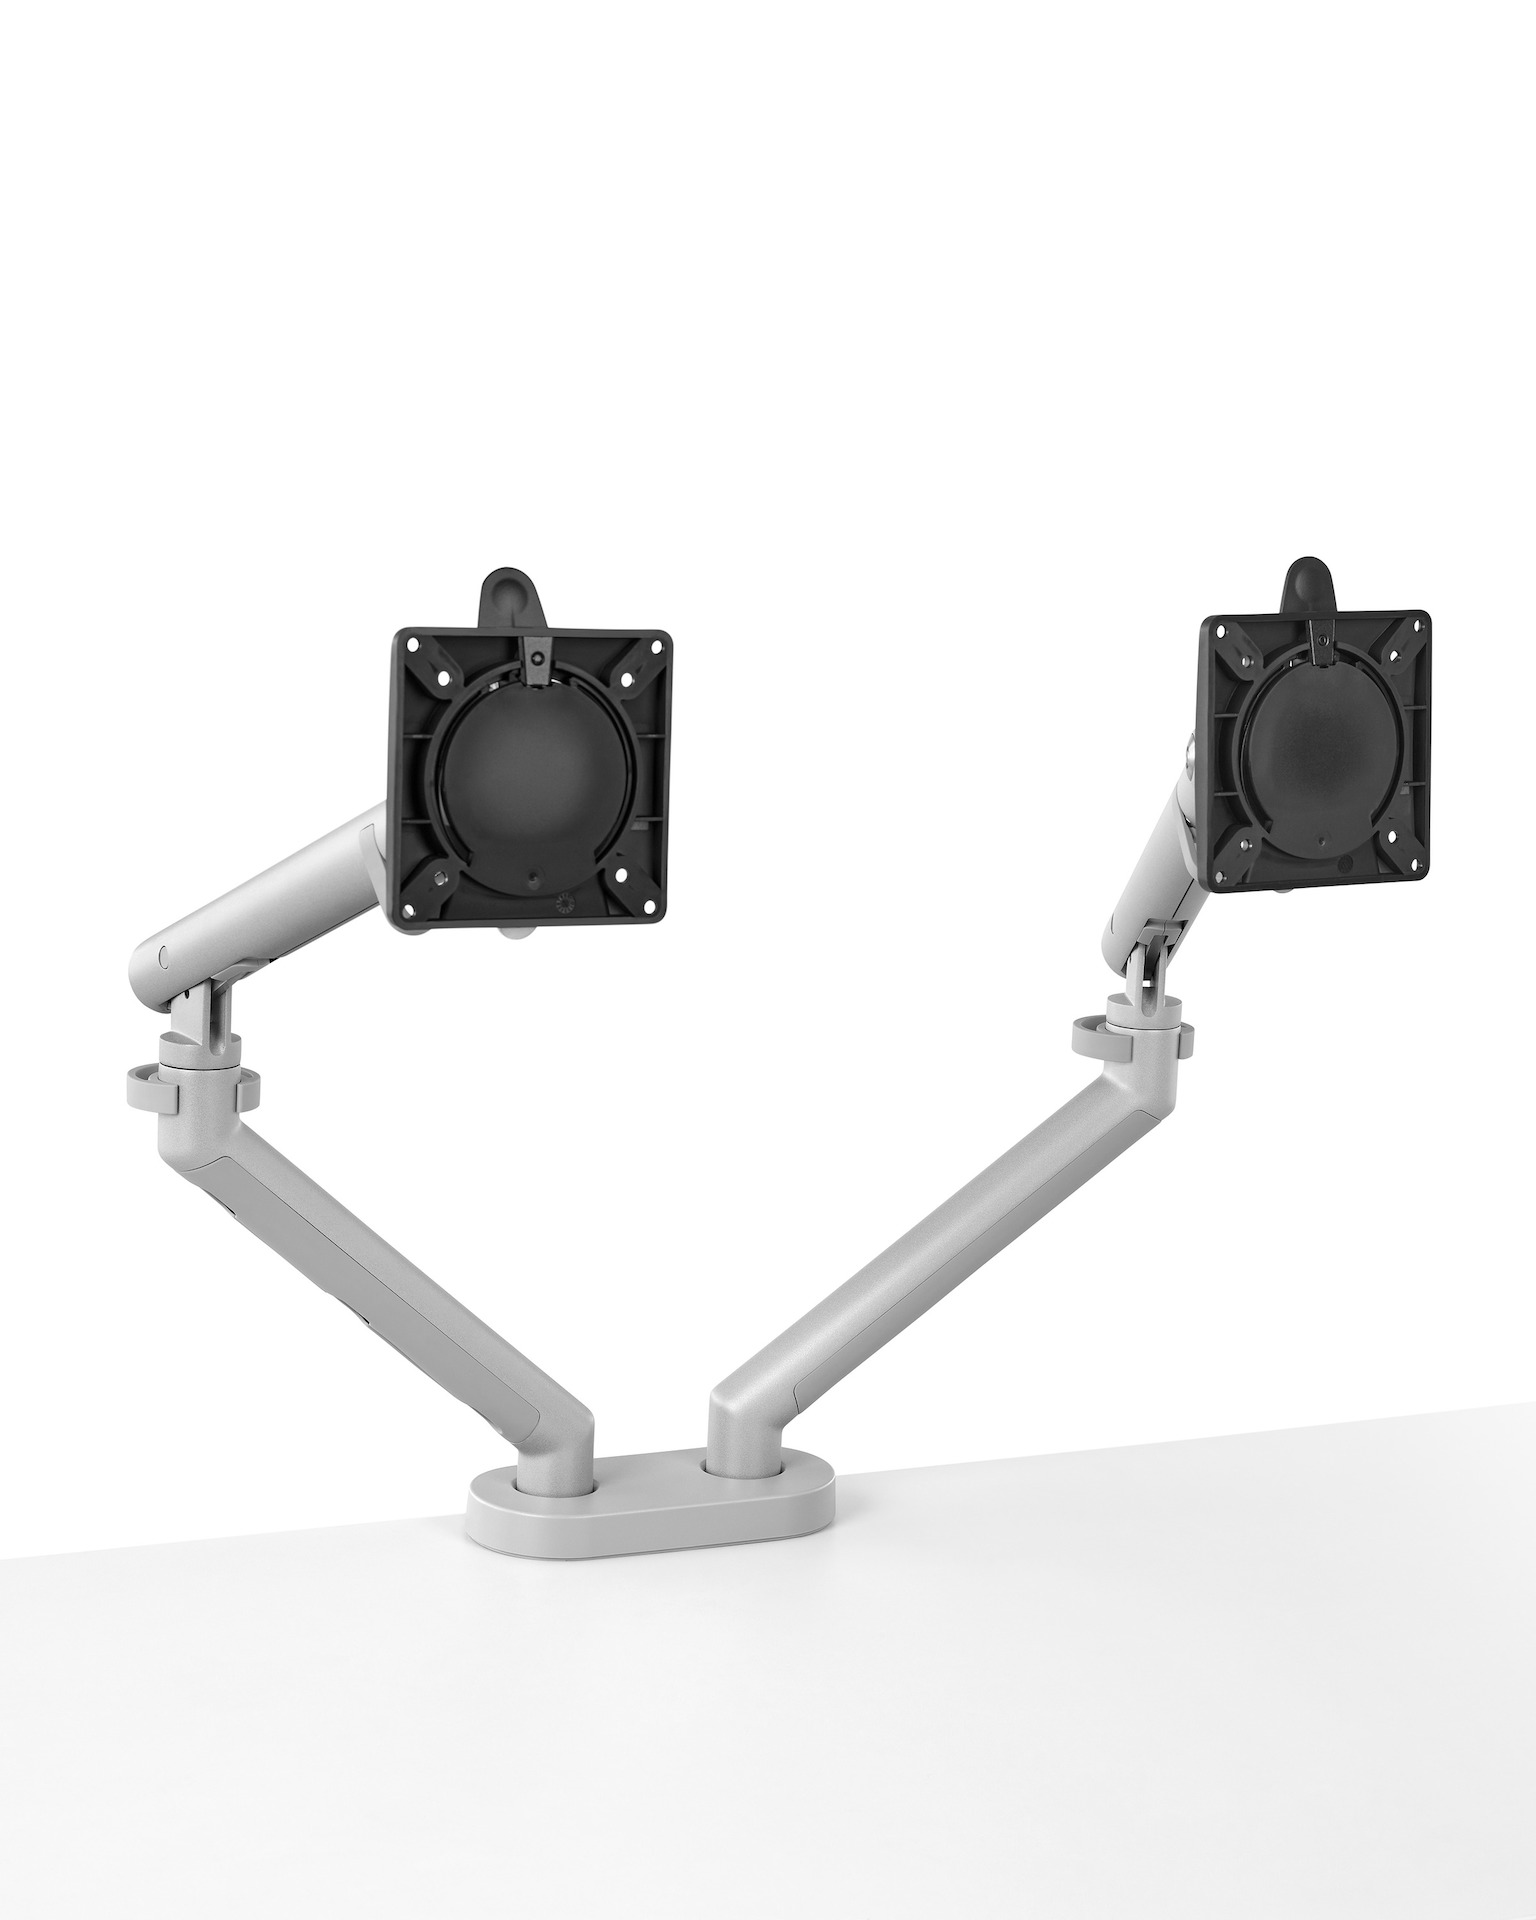 Silver Flo Dual Monitor Arm, viewed from the front.